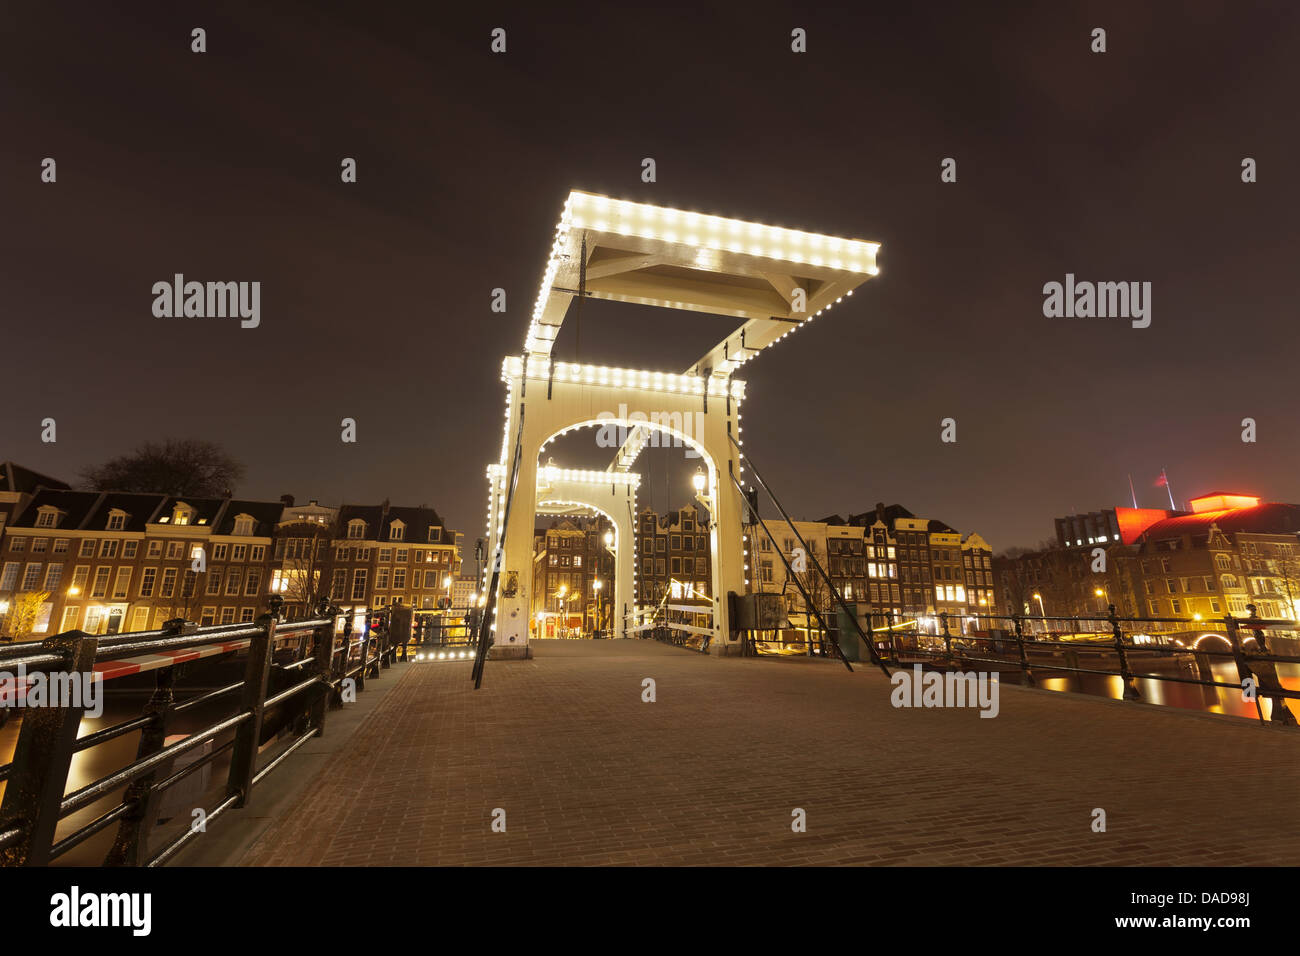 Magere Brug (pont Maigre), Amsterdam, Pays-Bas Banque D'Images